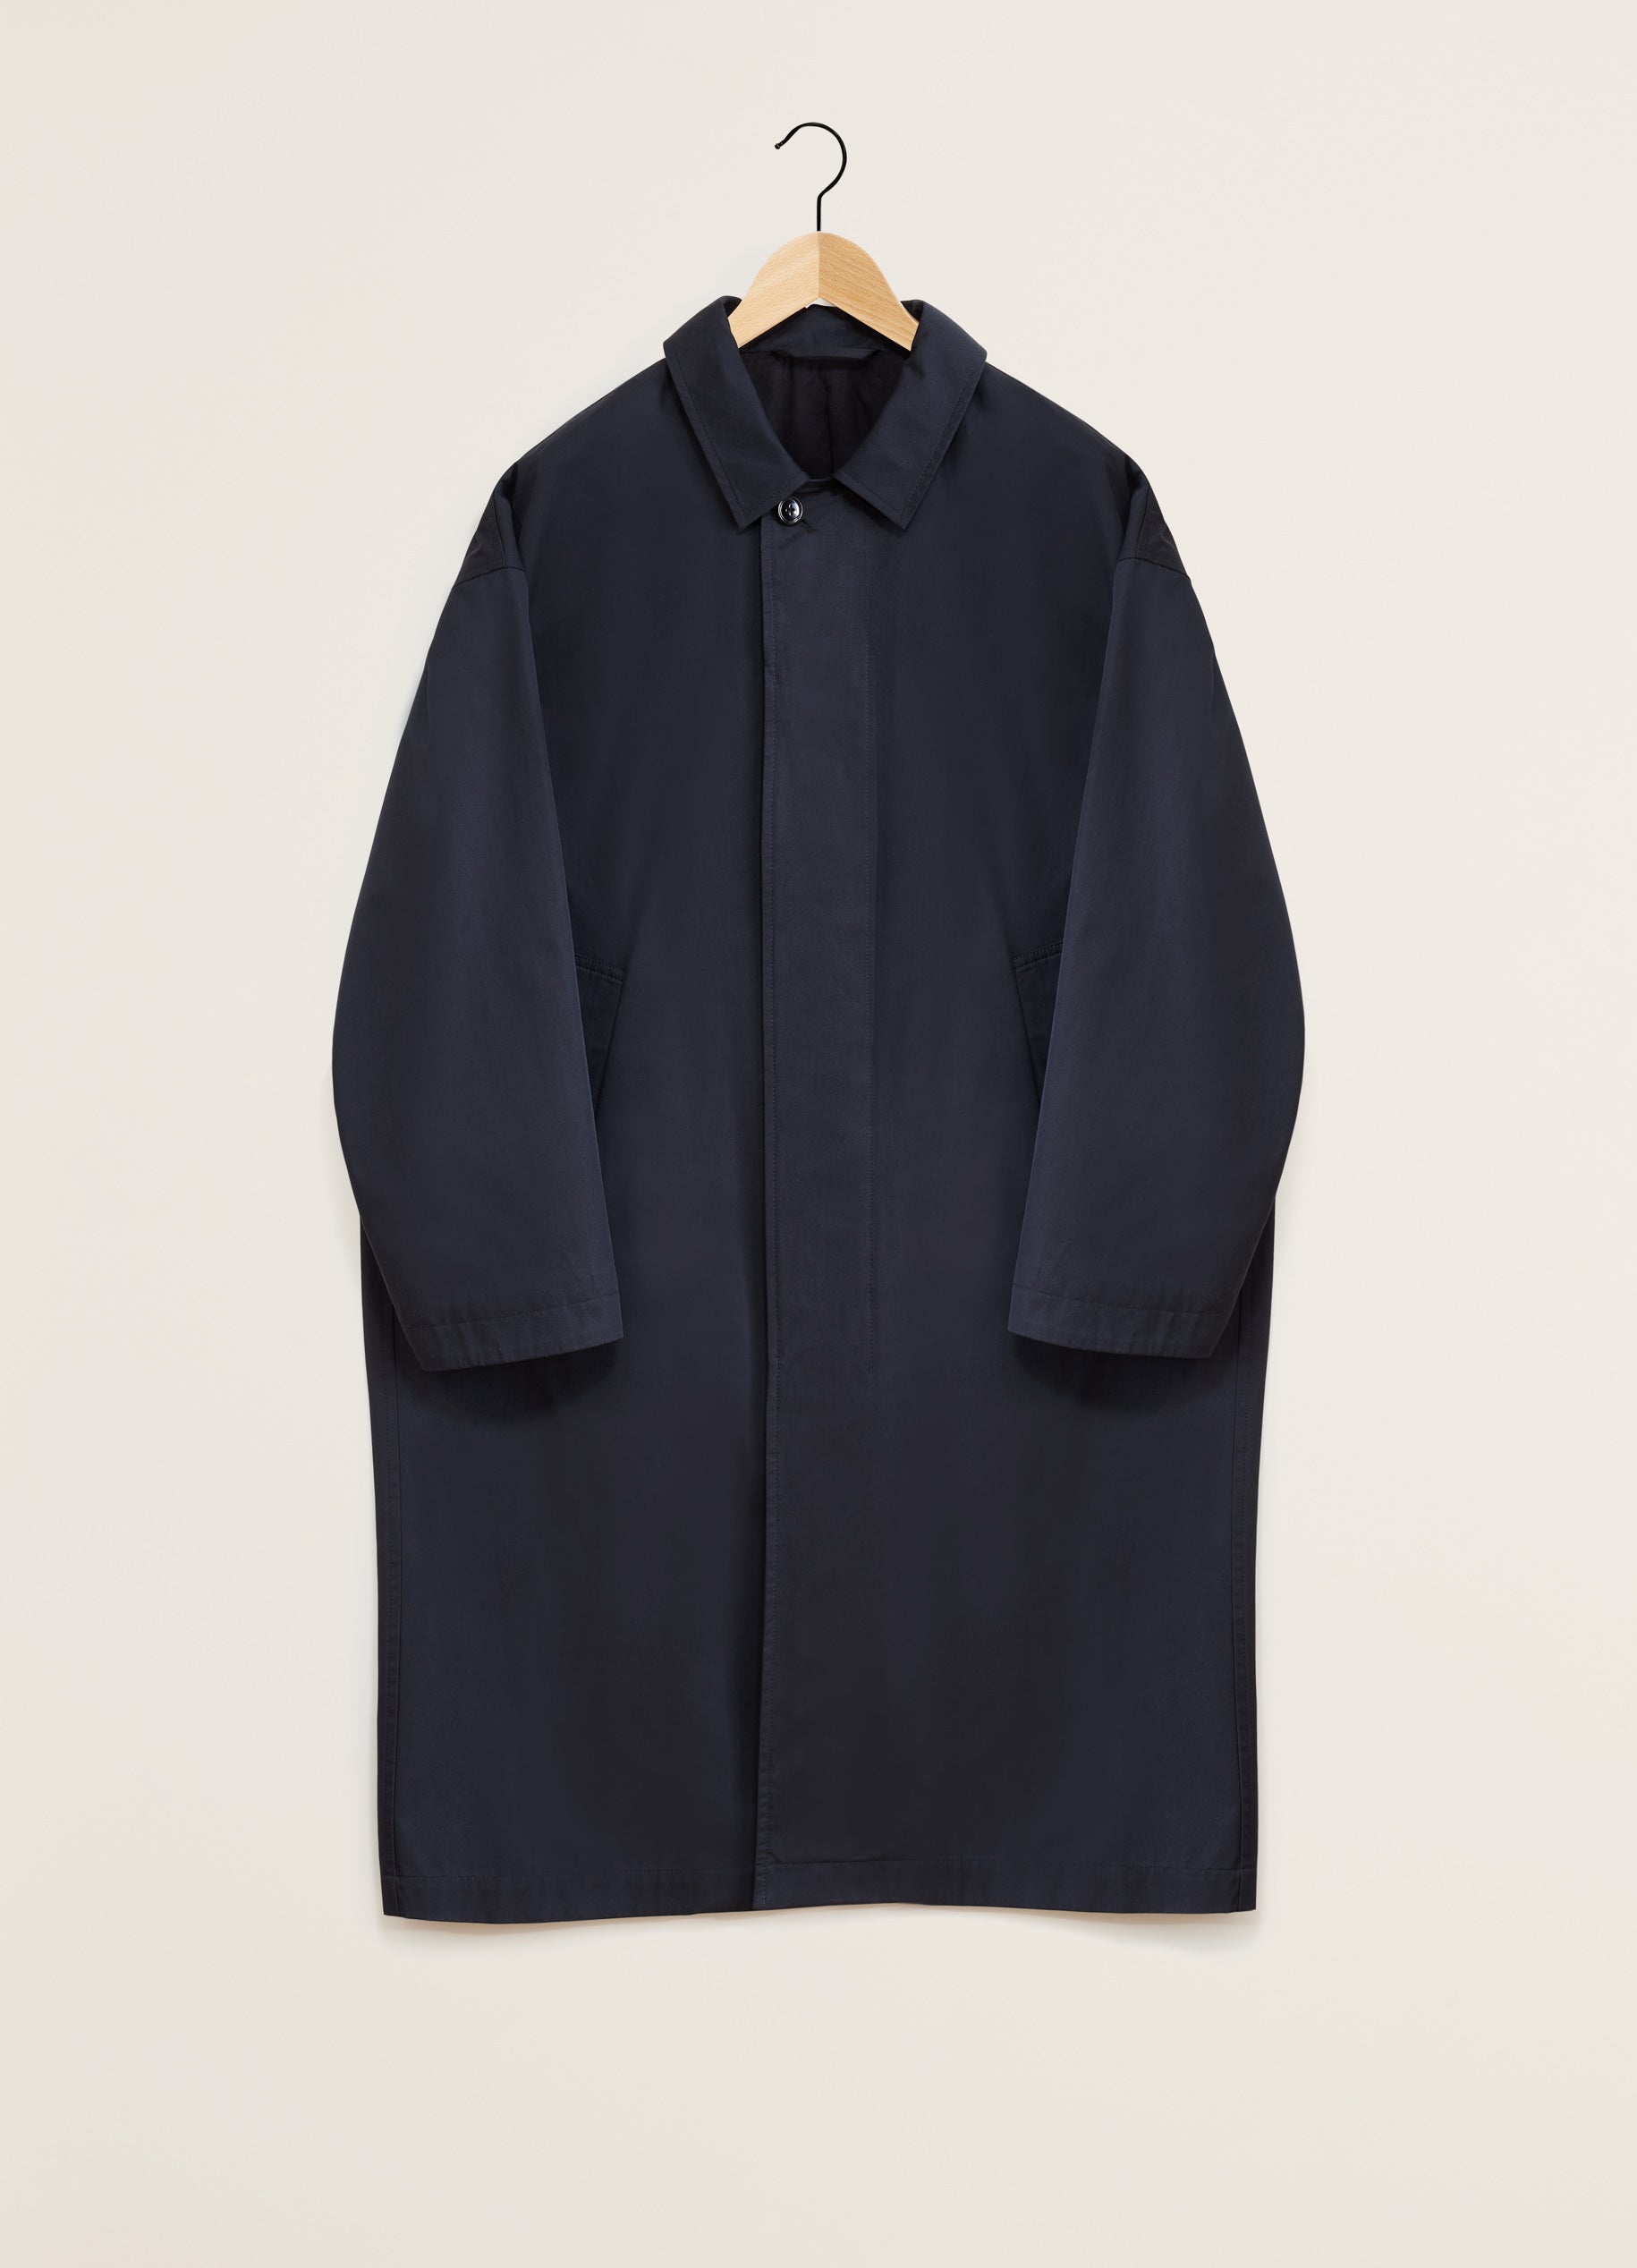 Jet Black Over Coat in Wr Cotton Twill | LEMAIRE